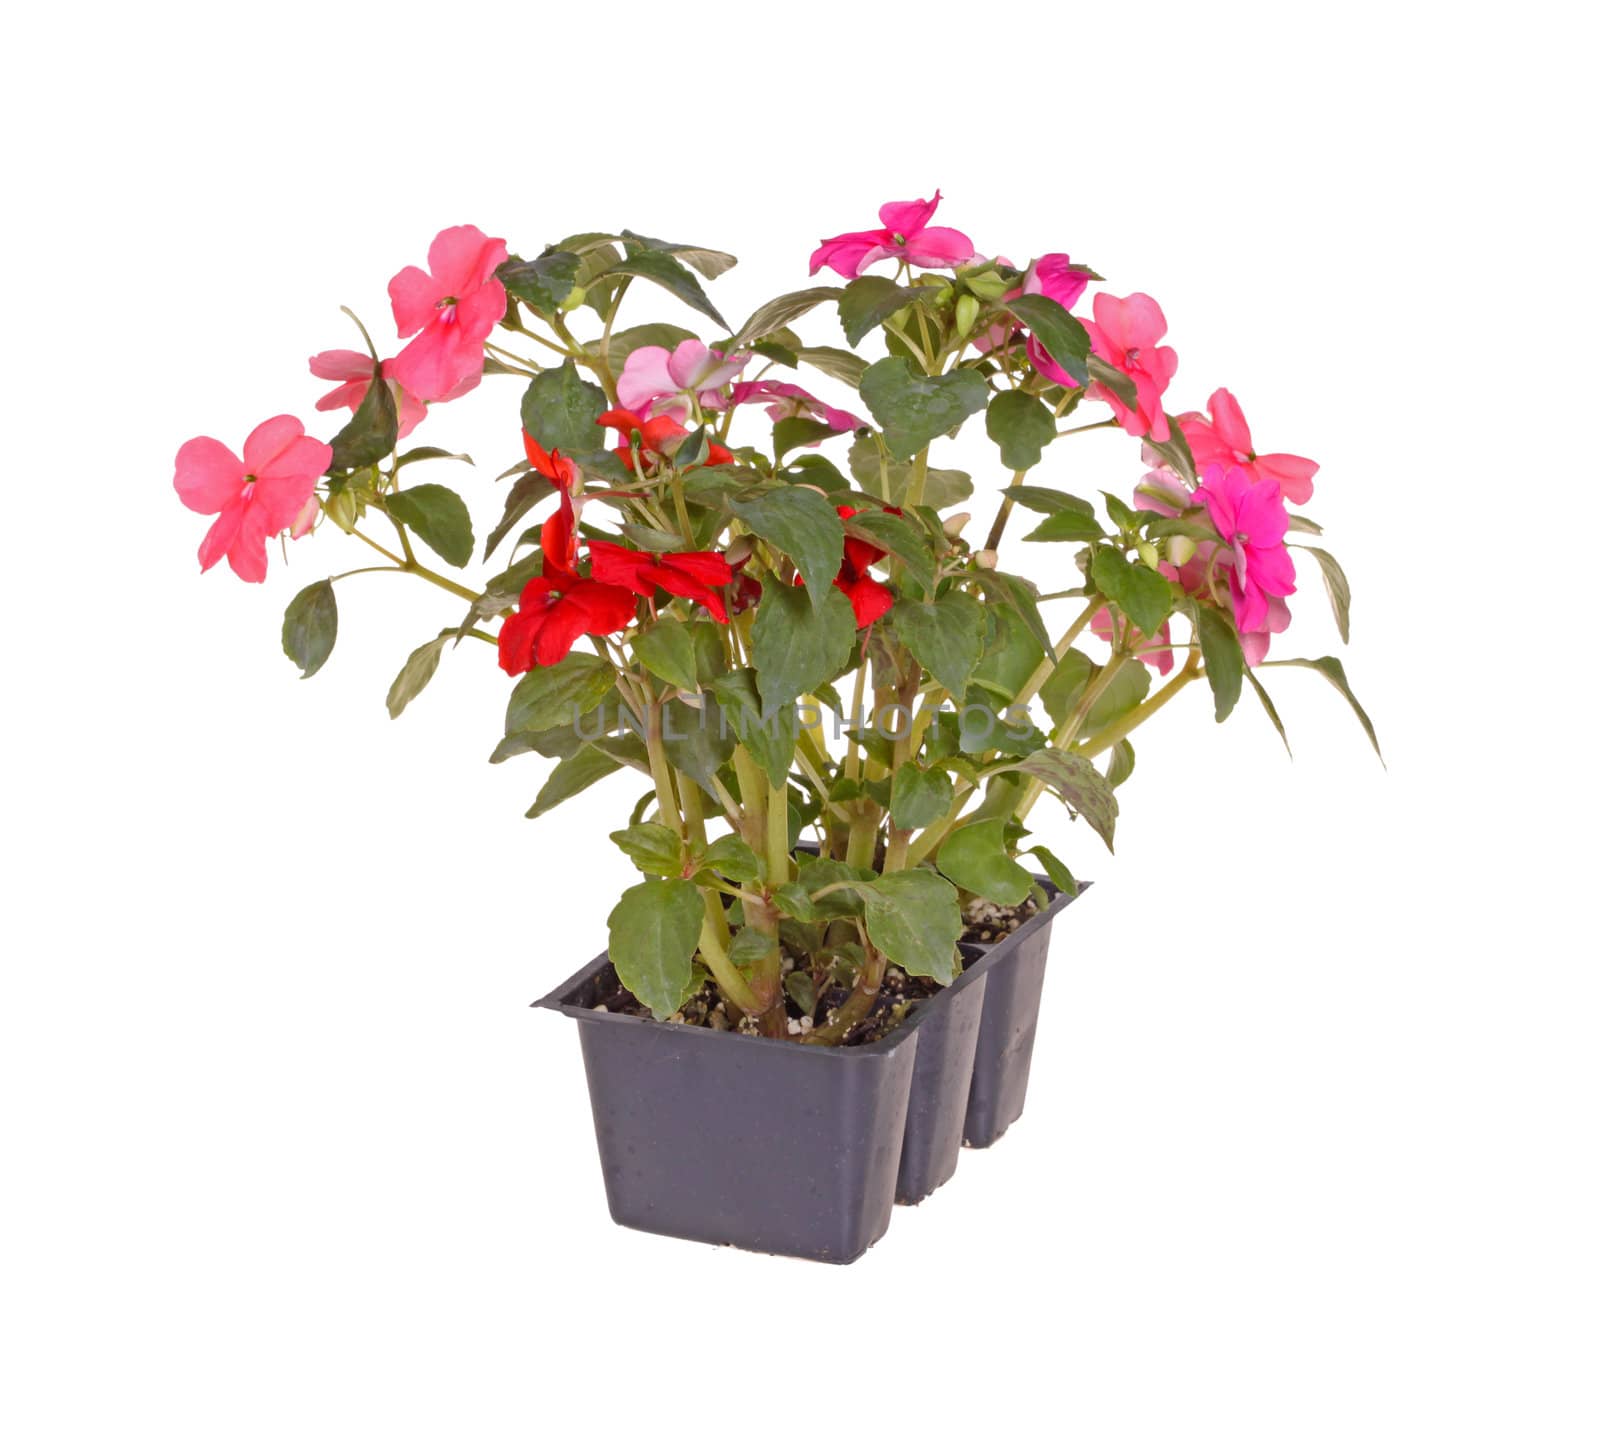 Pack of pink and red impatiens seedlings ready for transplanting by sgoodwin4813